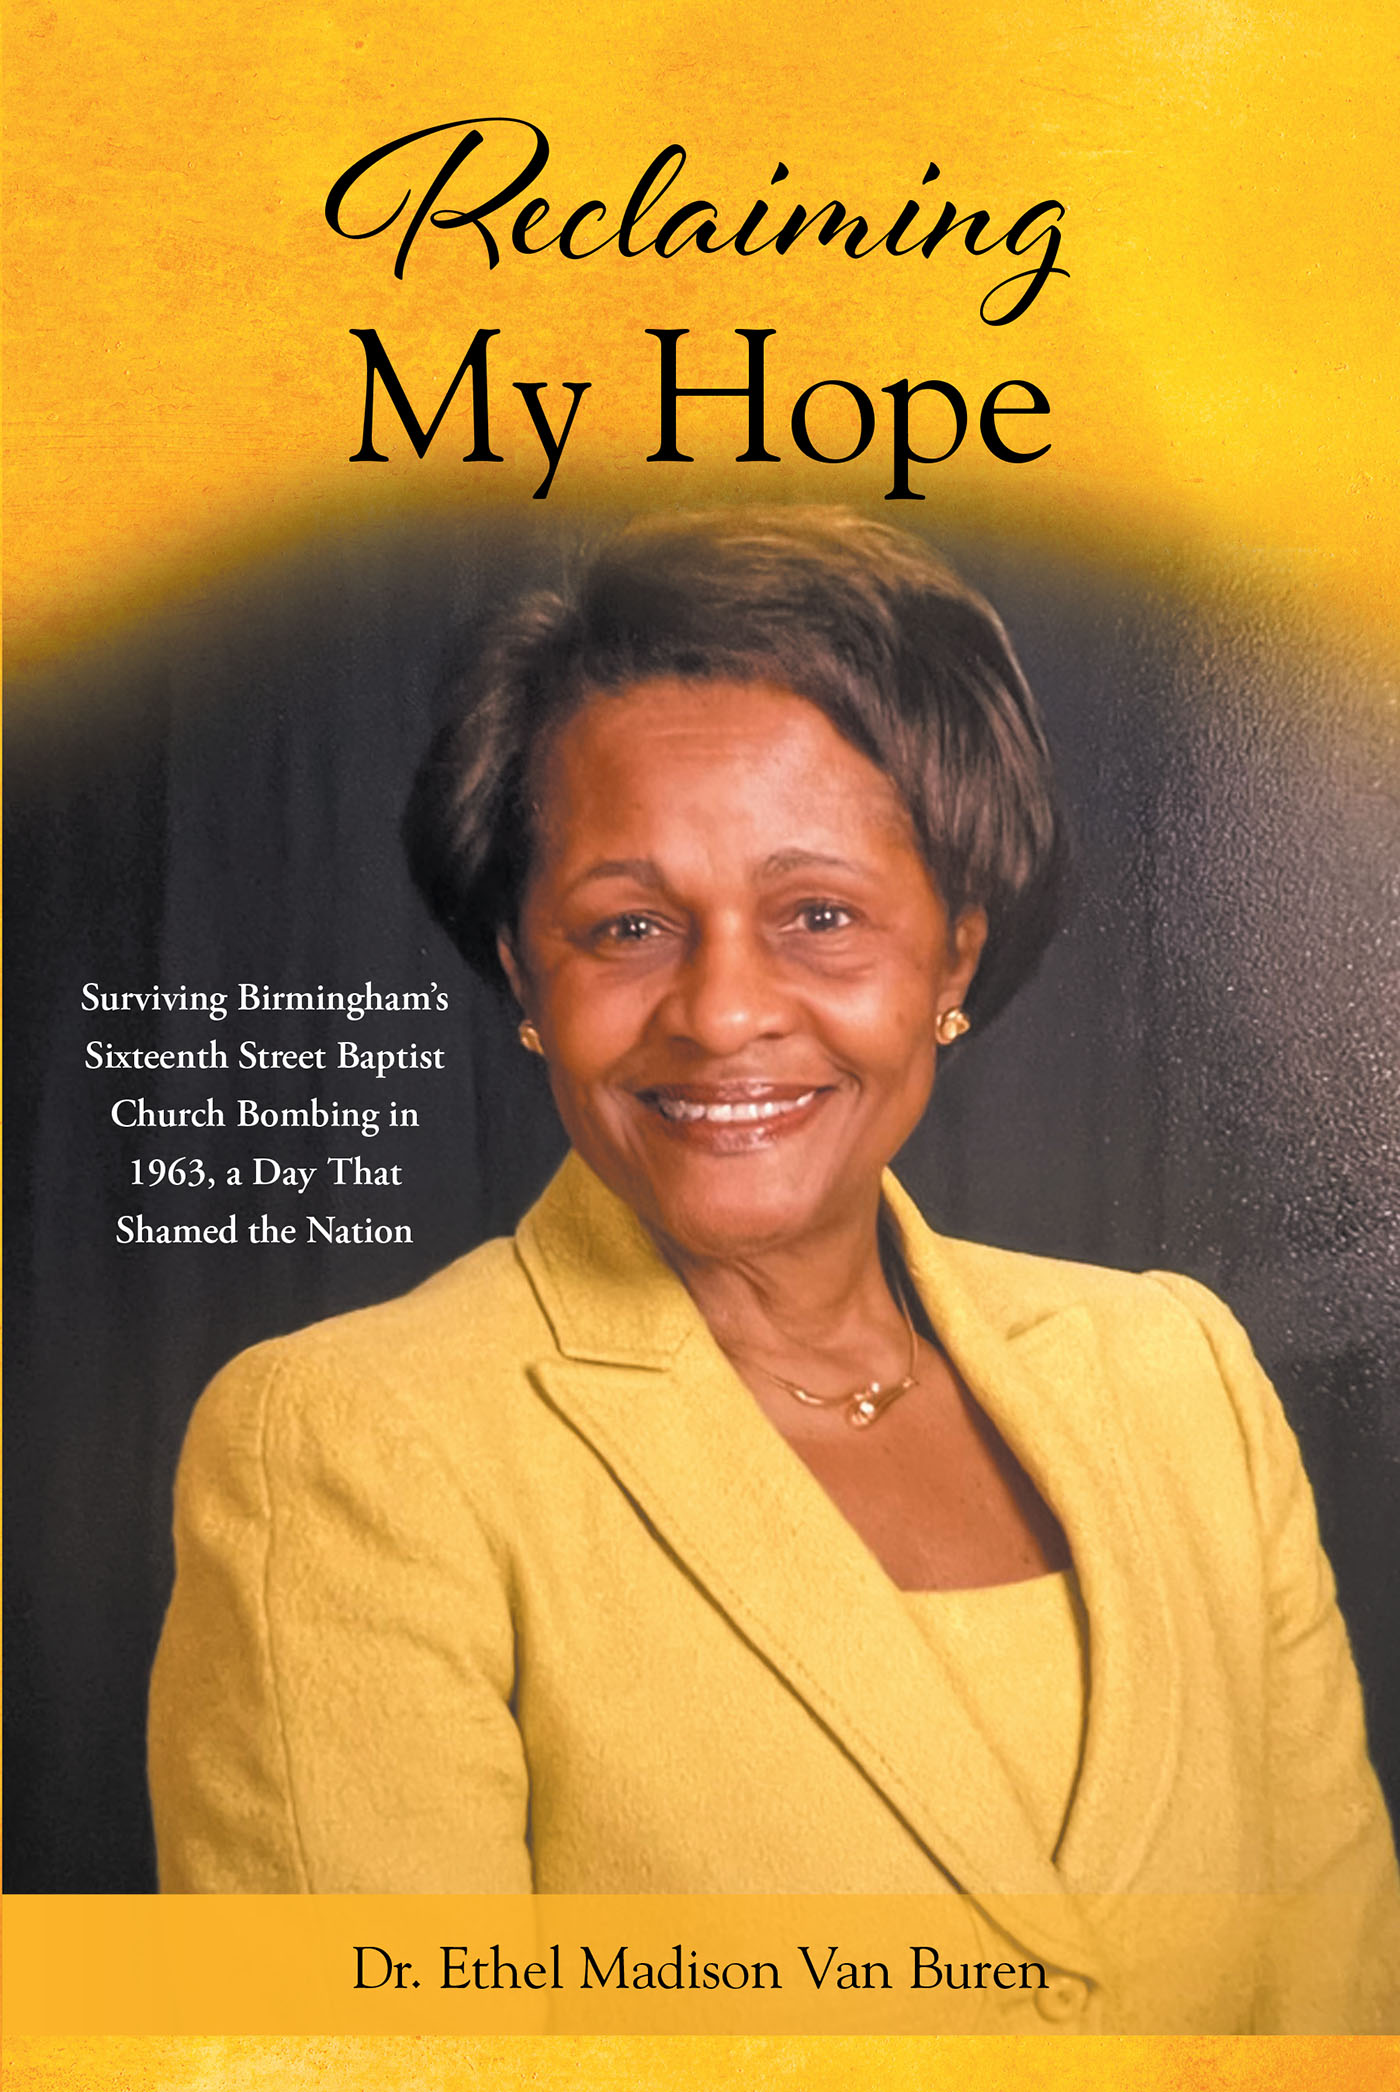 Dr. Ethel Madison Van Buren’s Newly Released "Reclaiming My Hope" is a Poignant Retelling of a Shocking Day in American History